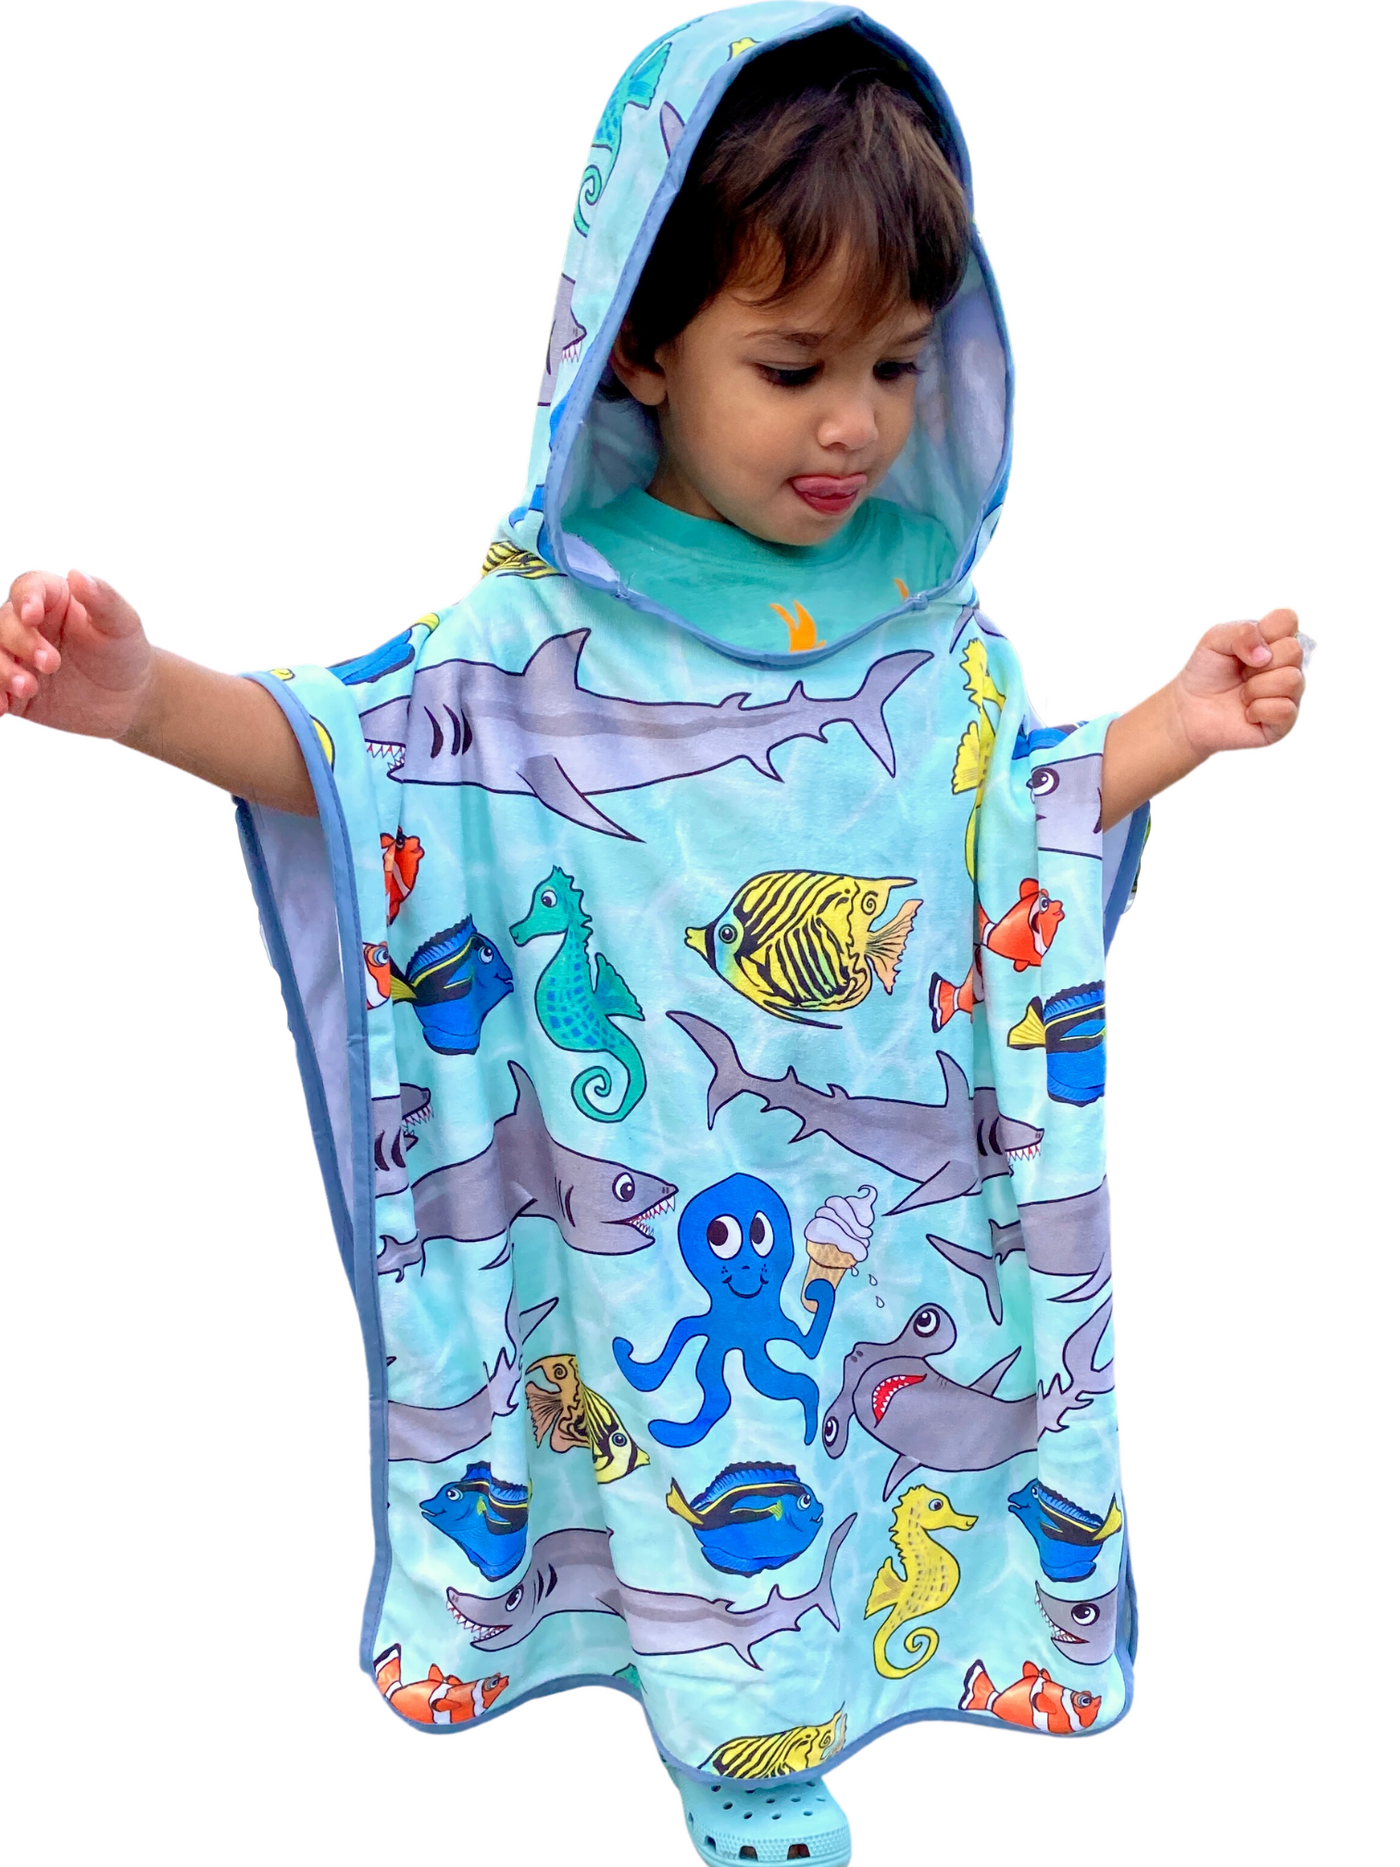 Hooded Kid Towel (18 months to 5 years): Kind Sharks' Birthday